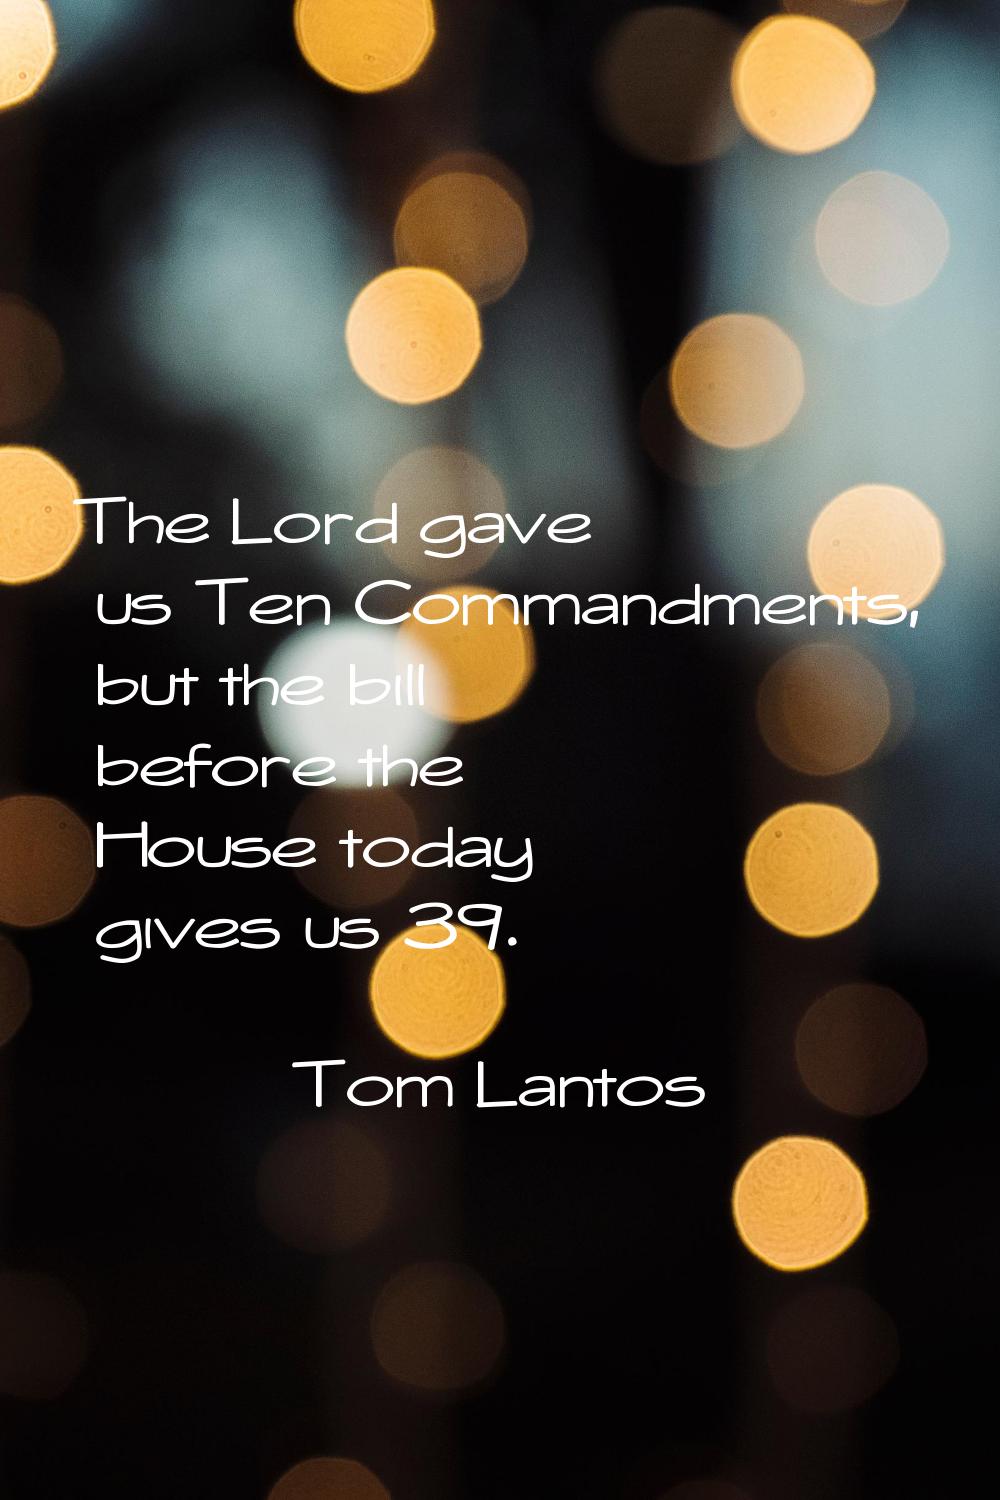 The Lord gave us Ten Commandments, but the bill before the House today gives us 39.